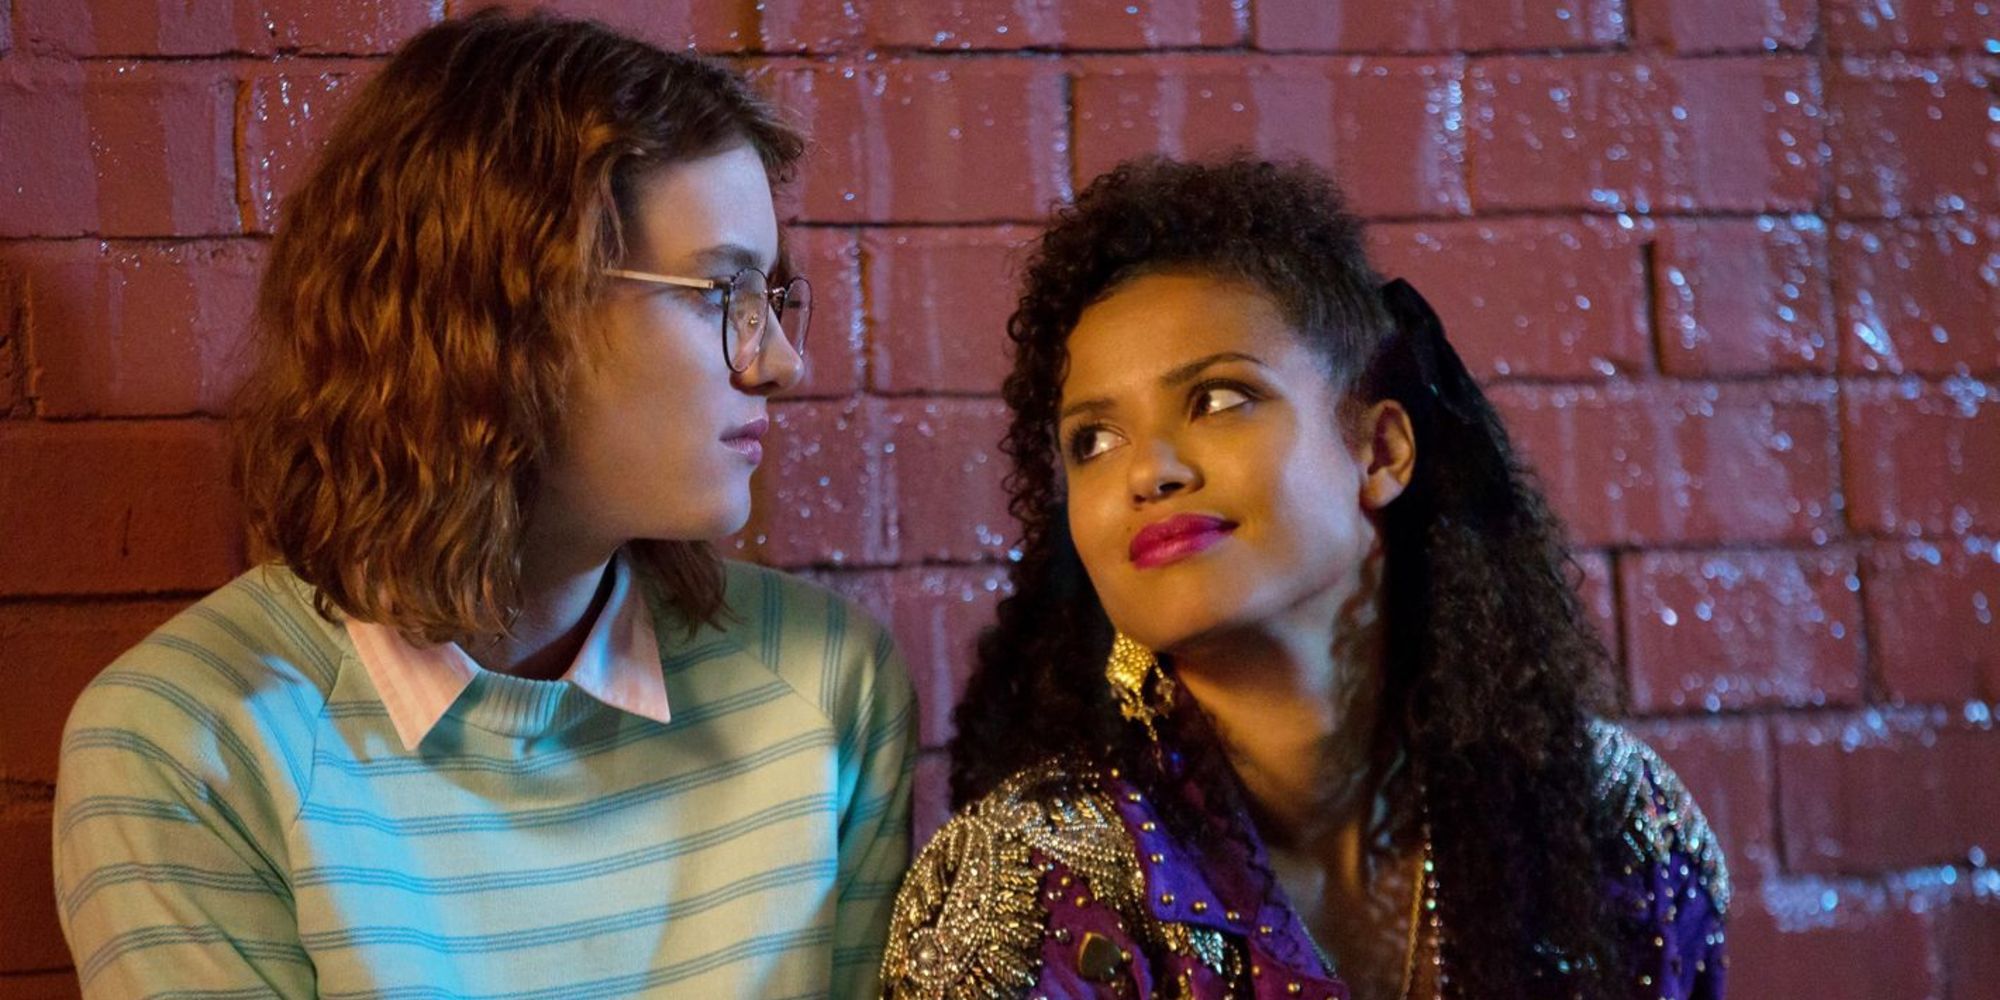 The 2 leads in the San Junipero episode of Black Mirror.